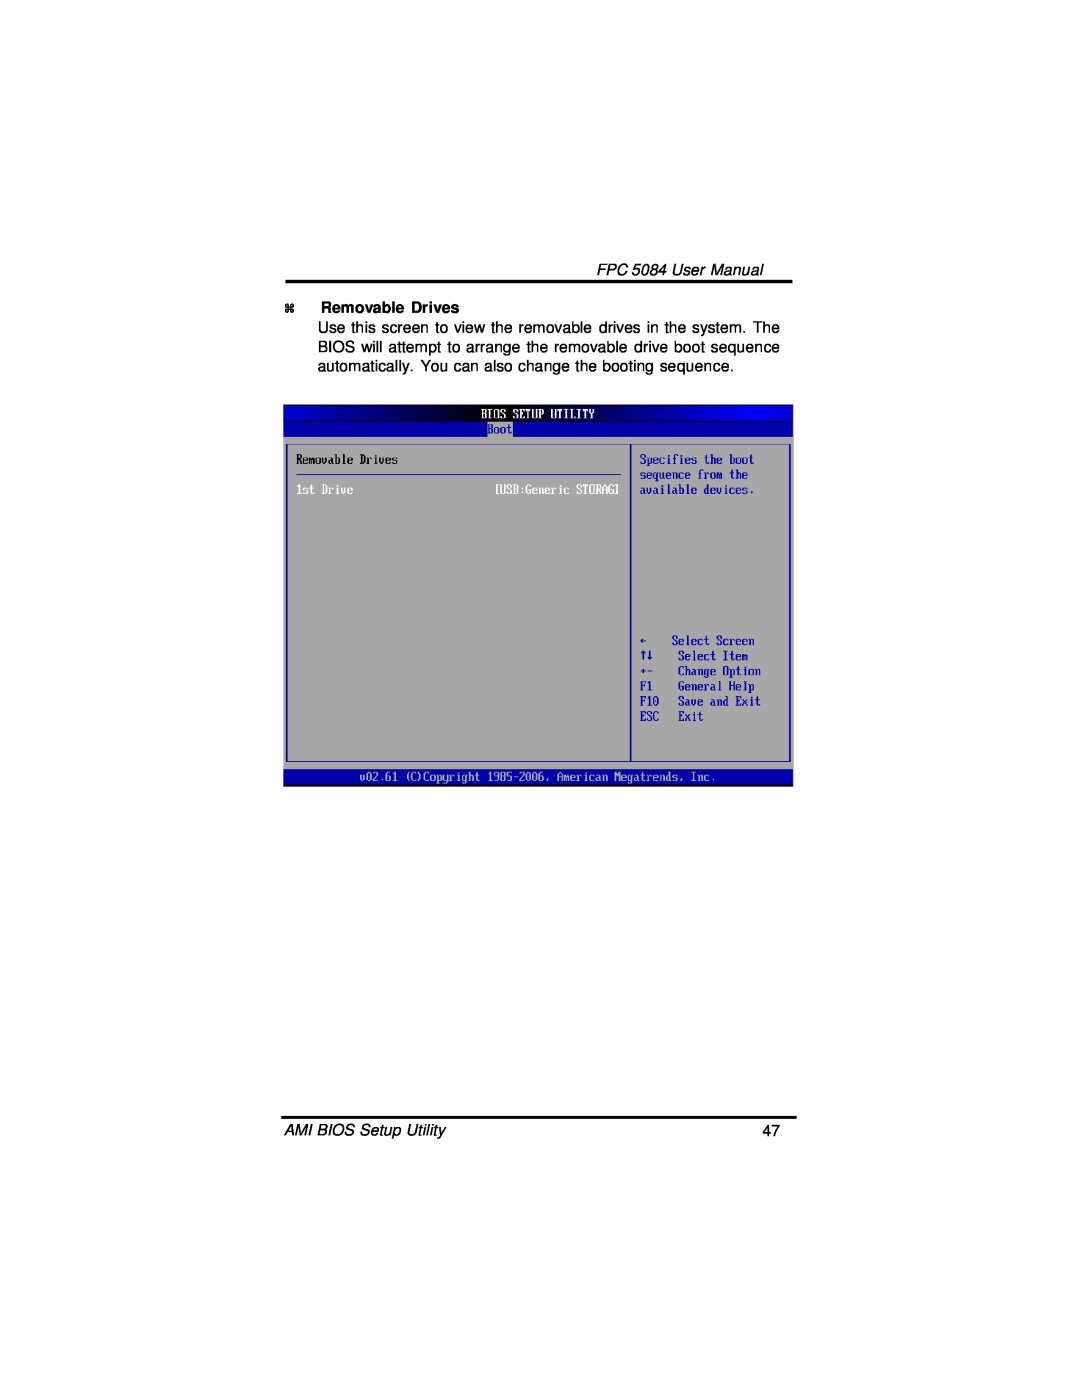 Intel N270, FPC 5084 user manual Removable Drives 